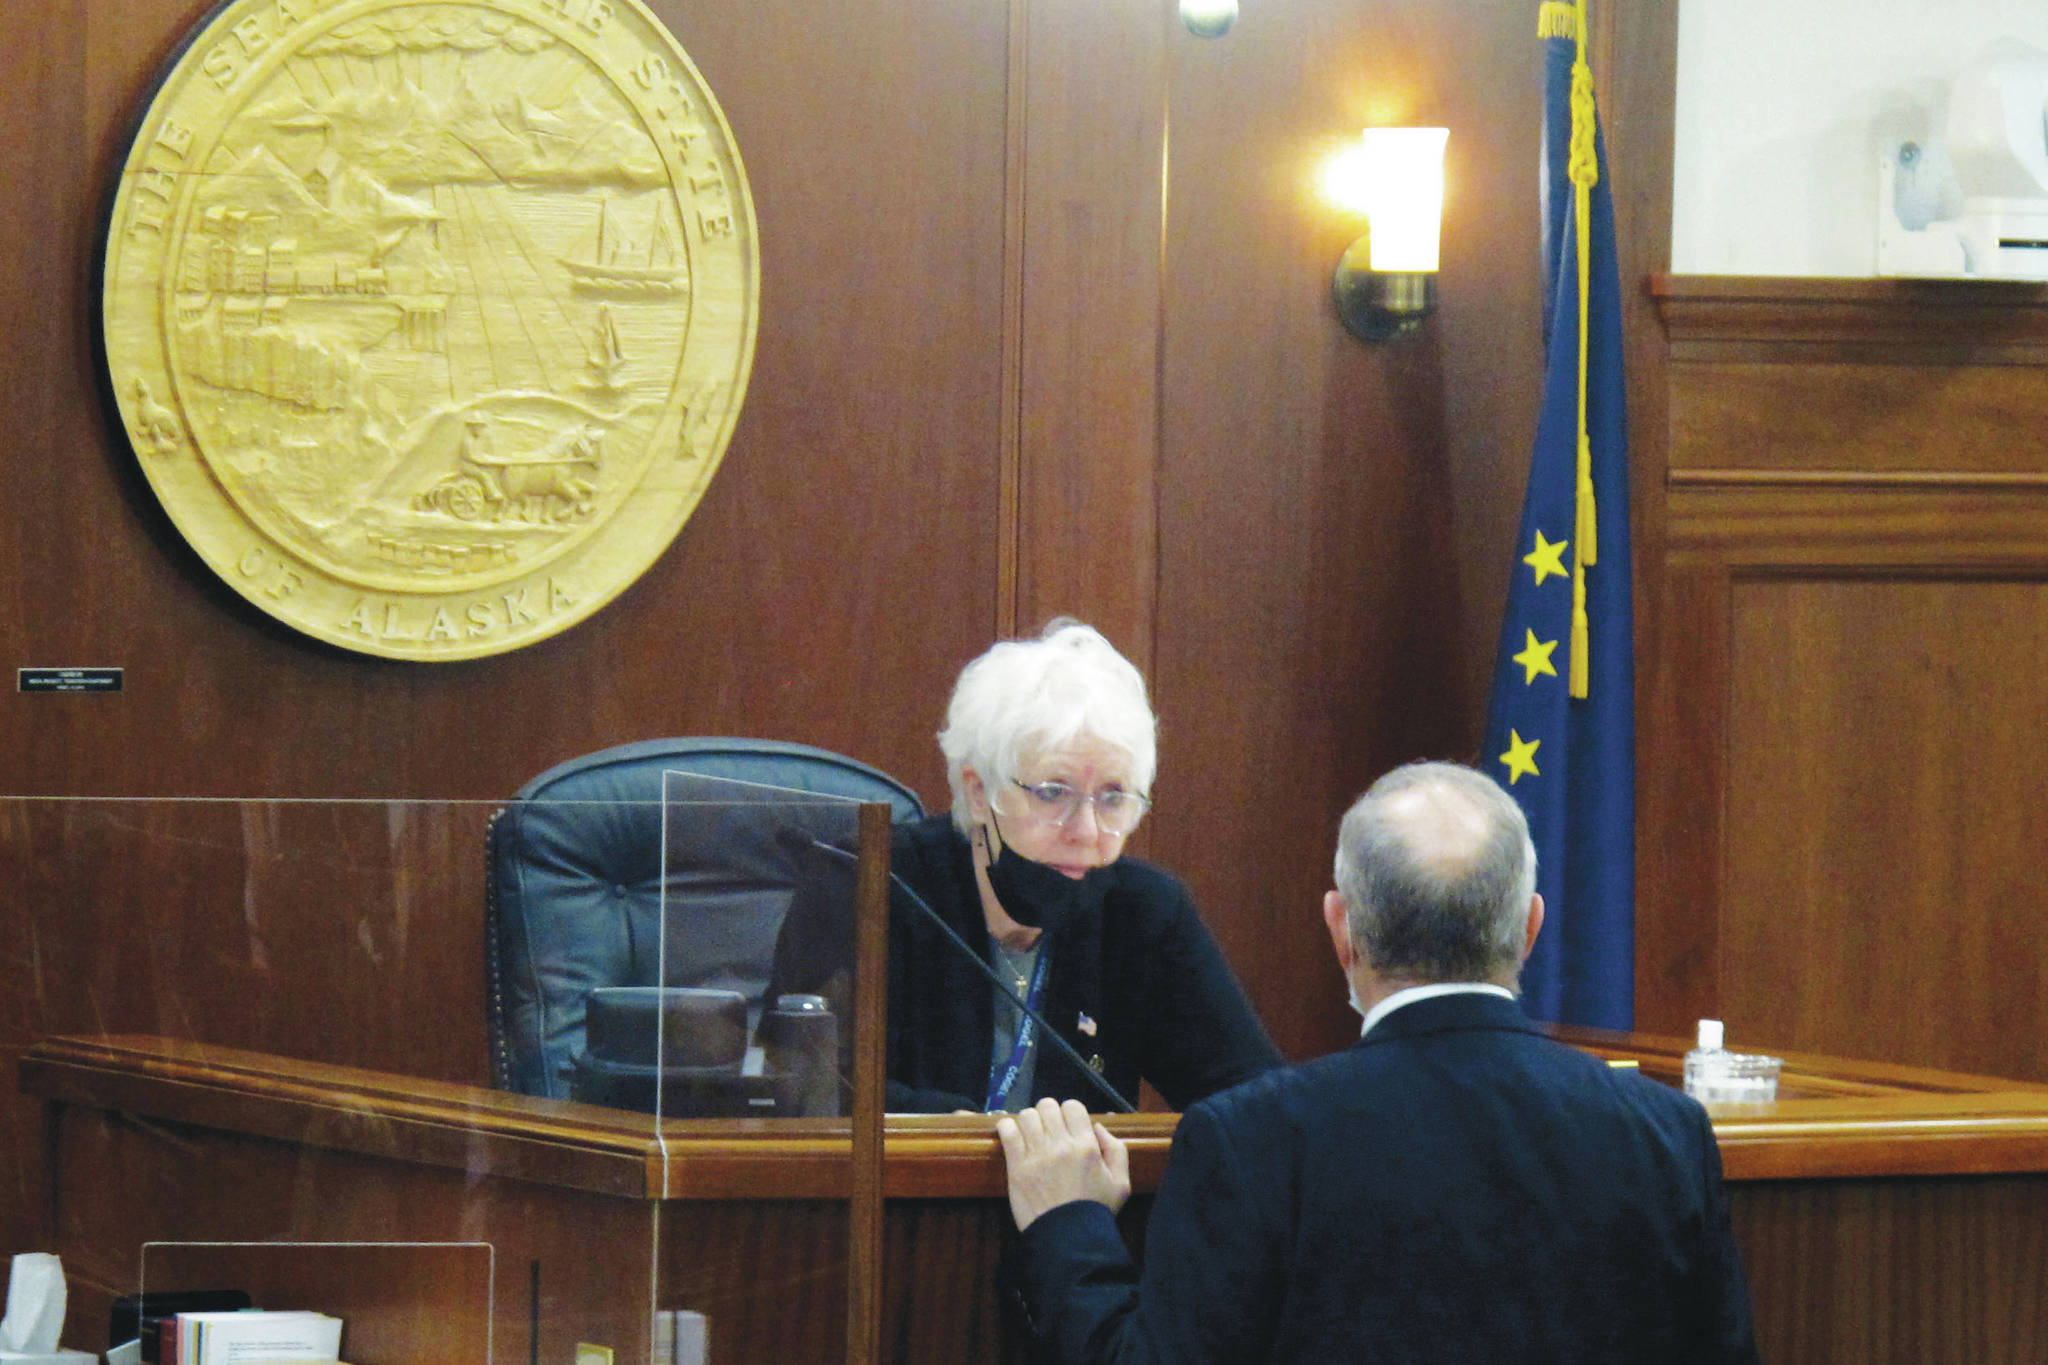 Becky Bohrer / Associated Press
Alaska House Speaker Louise Stutes speaks to Rep. Bryce Edgmon on the House floor on Thursday, in Juneau. The House, which has struggled to organize, on Thursday adopted a report setting out committee assignments, a month into the legislative session.